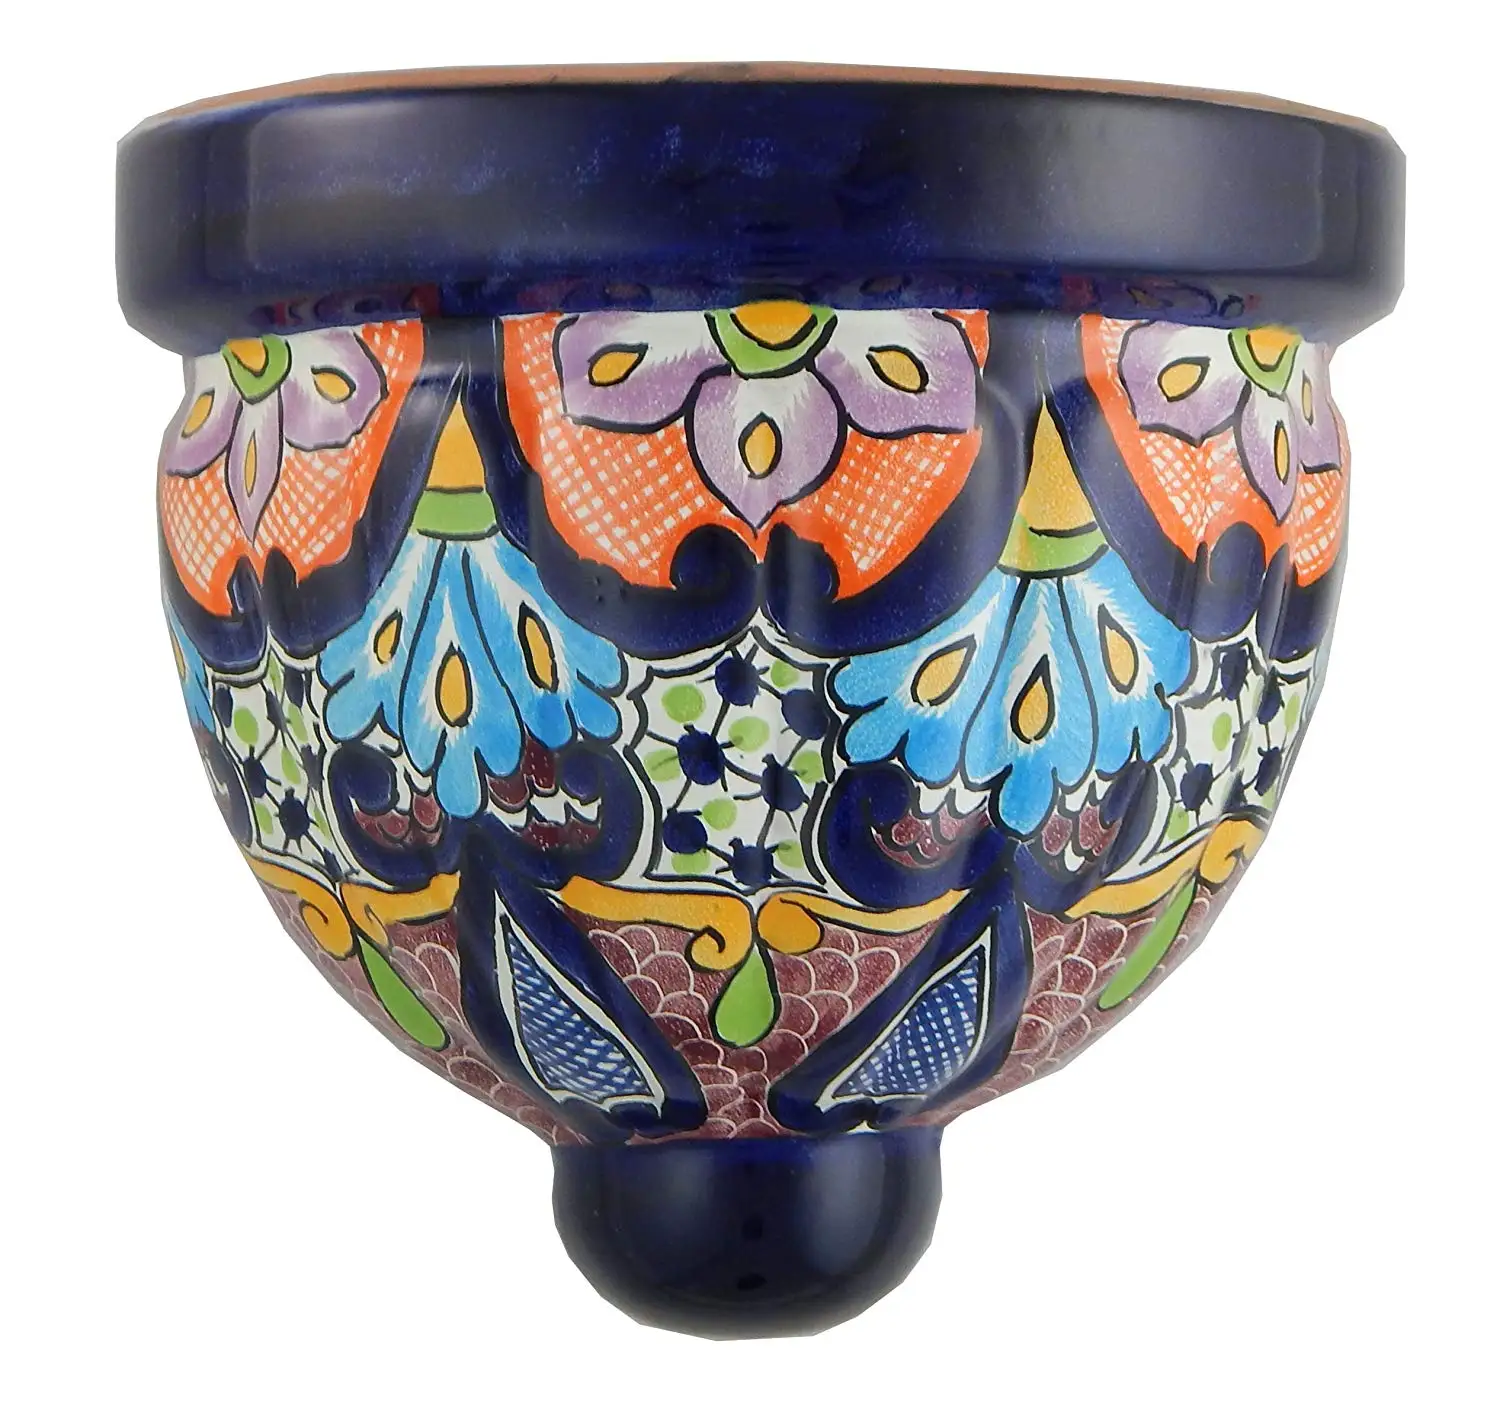 Buy Talavera Ceramic Sconce Wall Planter Mexican Fine Pottery 7 Quot Hand Painted Original Design Tulips Flowers Wall Art Art In Cheap Price On M Alibaba Com